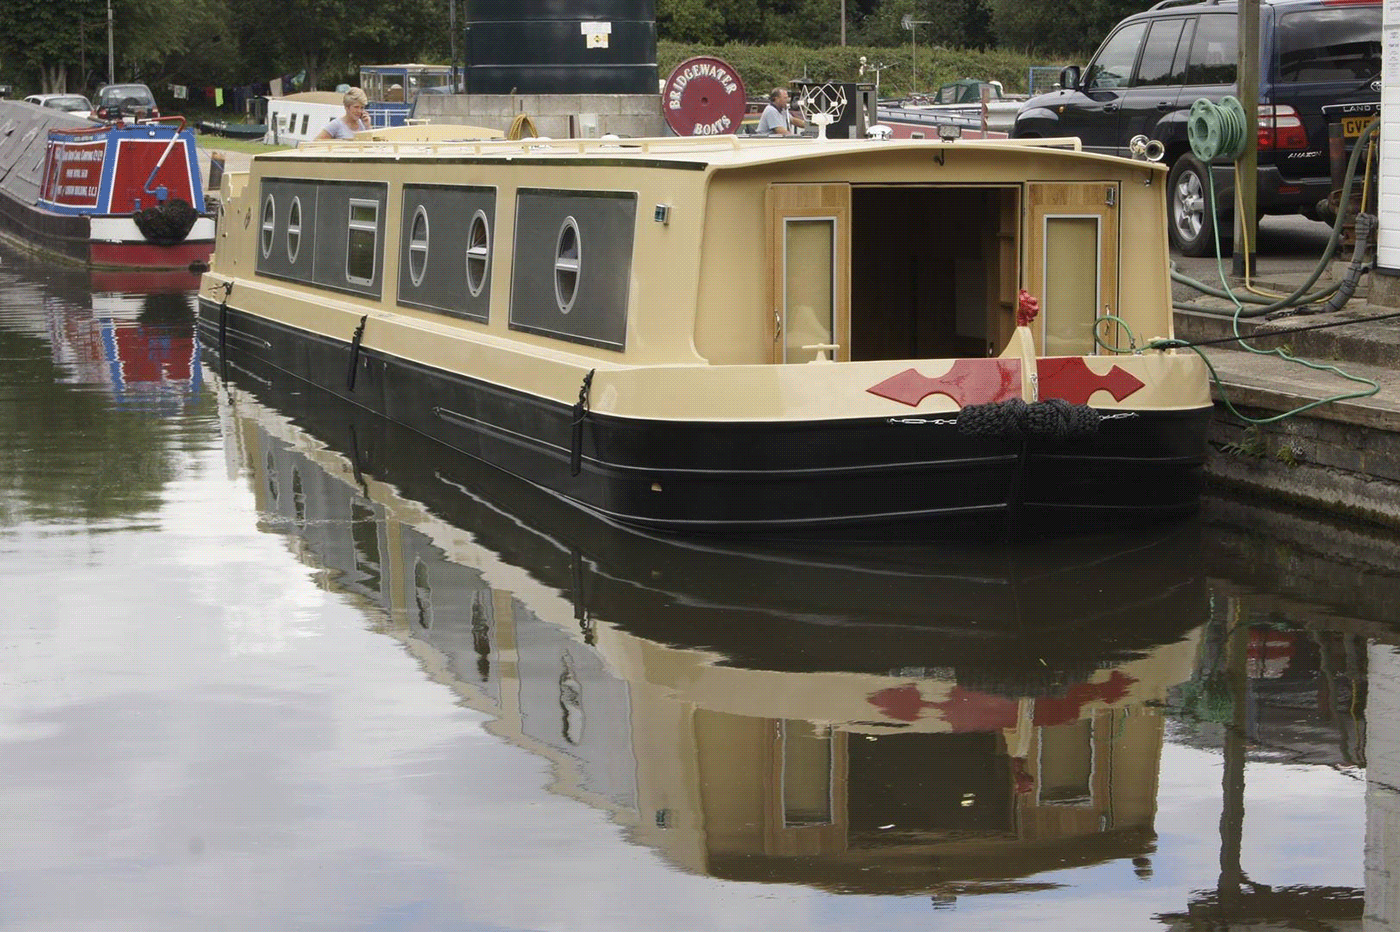 Barge canal boat London canal boat VIKING CANAL BOAT